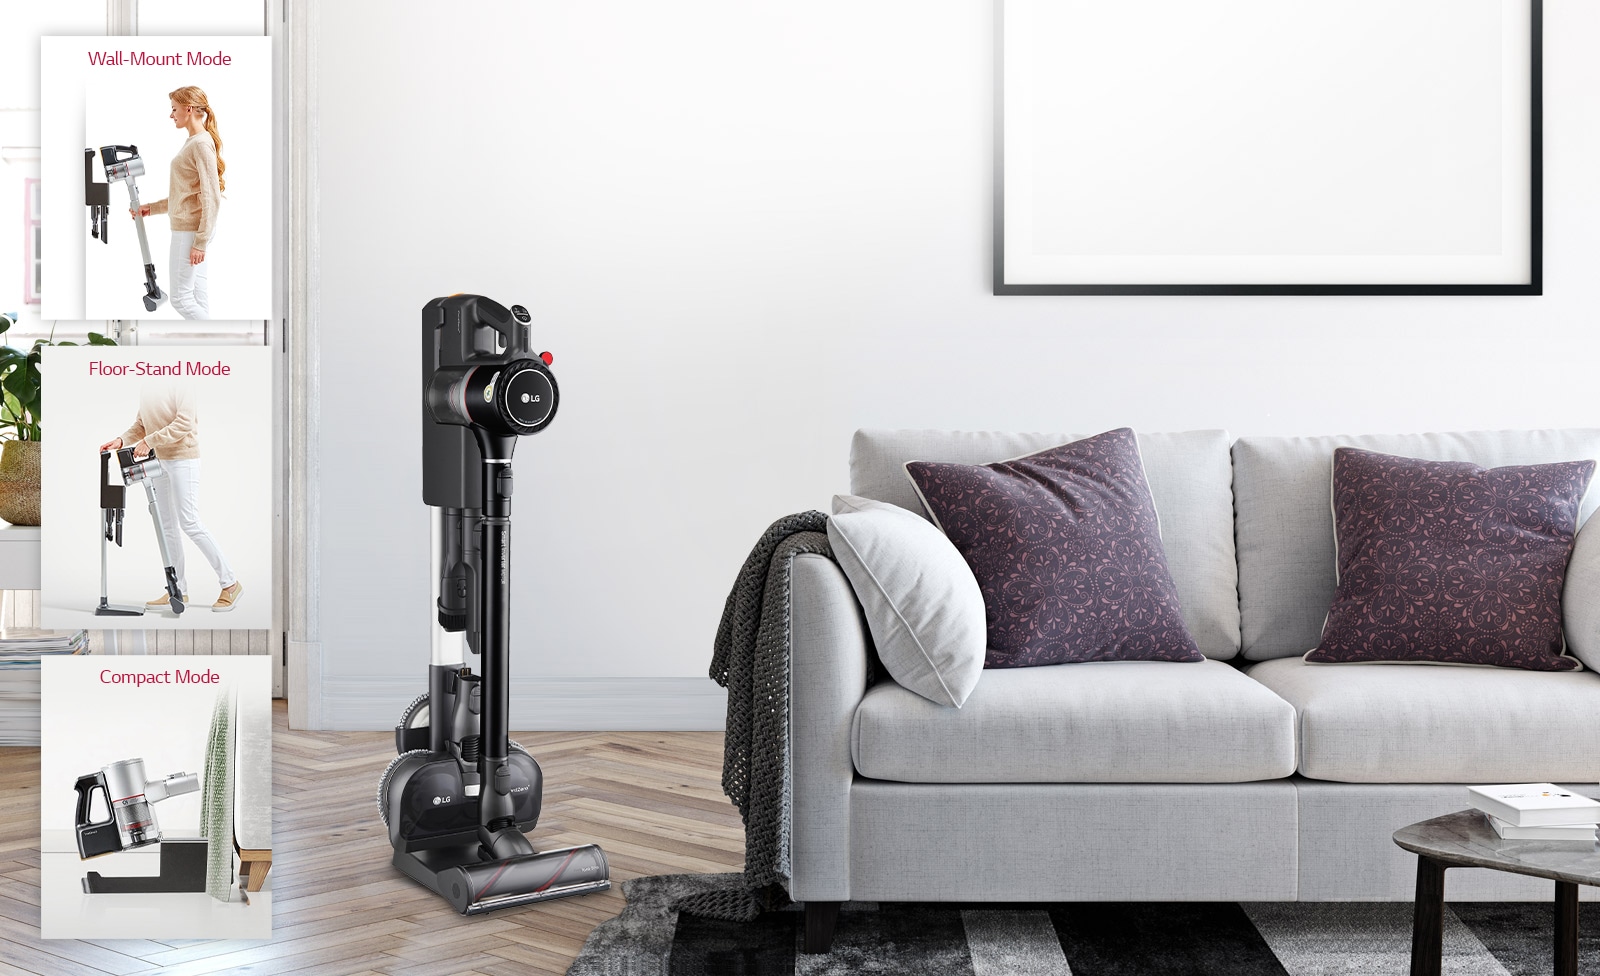 The CordZero A9 Kompressor Vacuum is in the charging stand in a living room conveniently placed near the sofa.